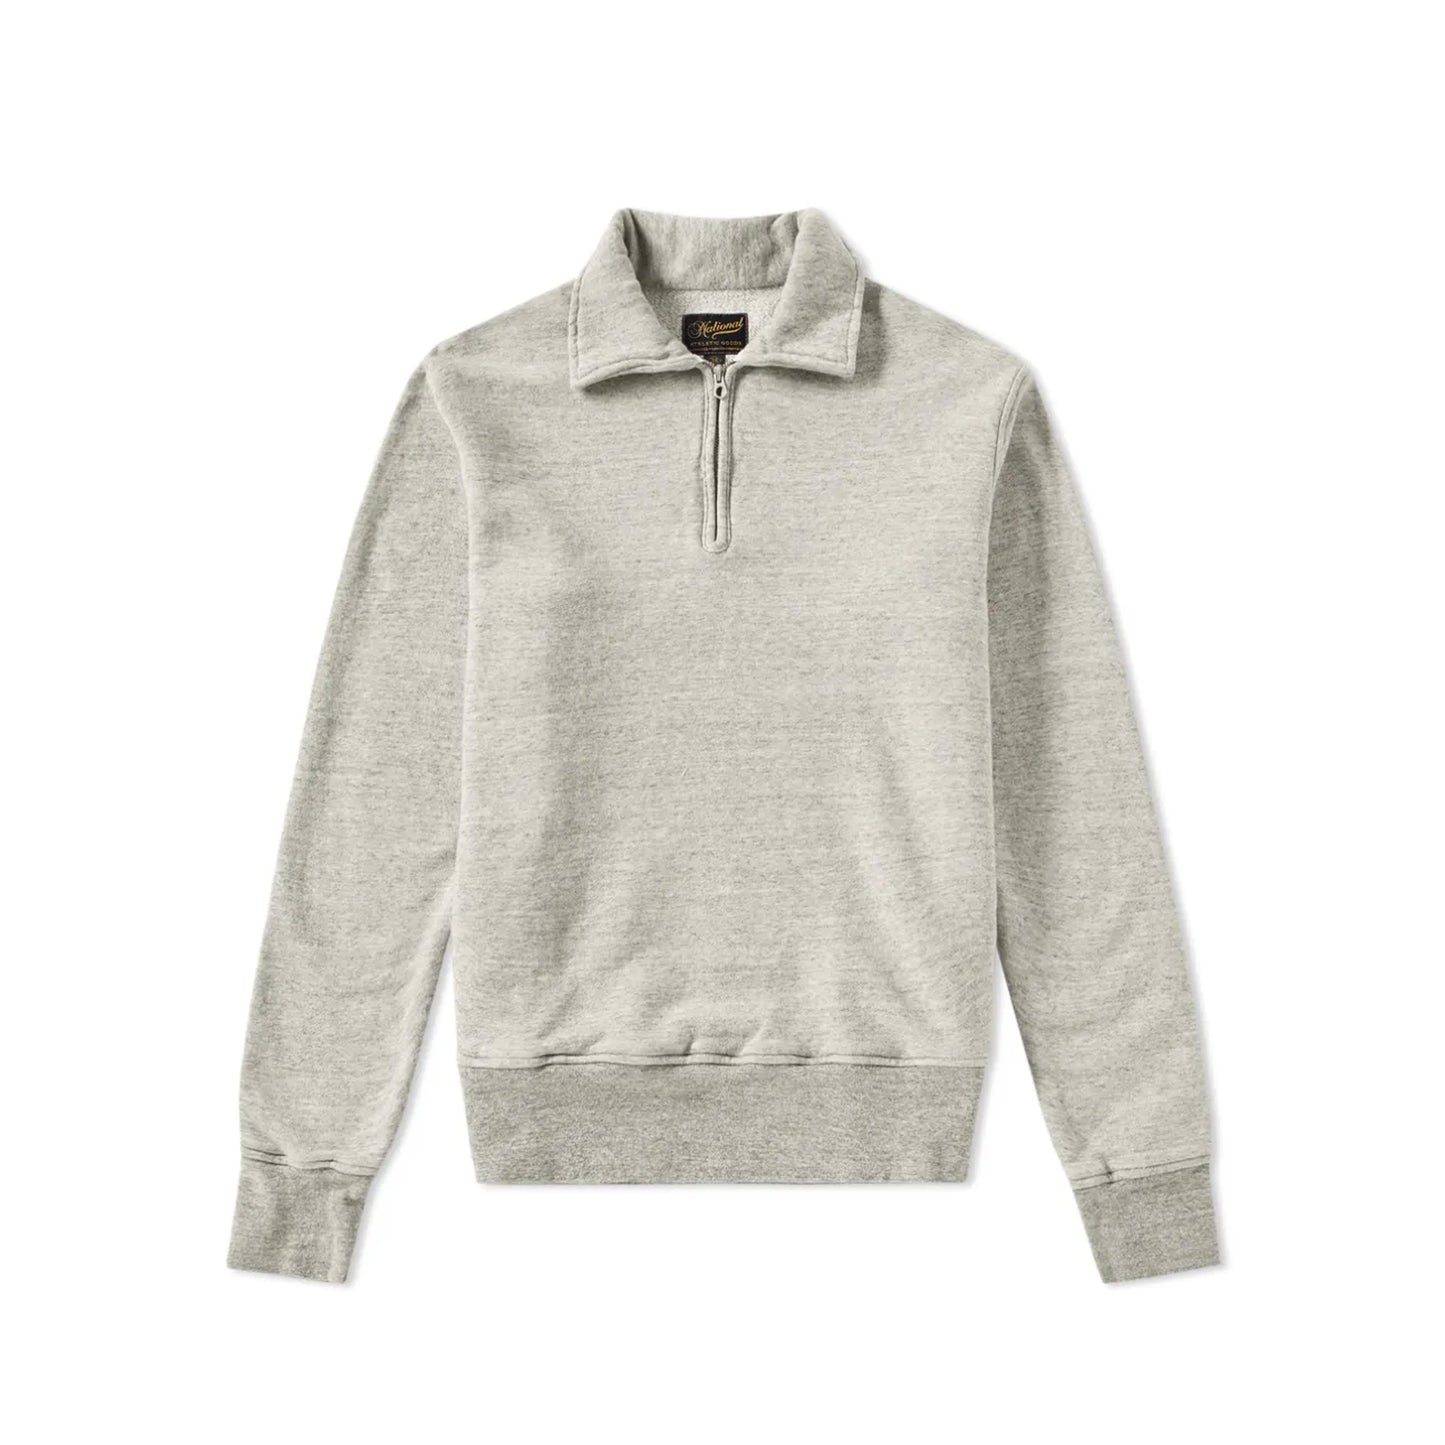 National Athletic 1/4 Zip Campus Sweat - Mid Grey - SALE 35% OFF